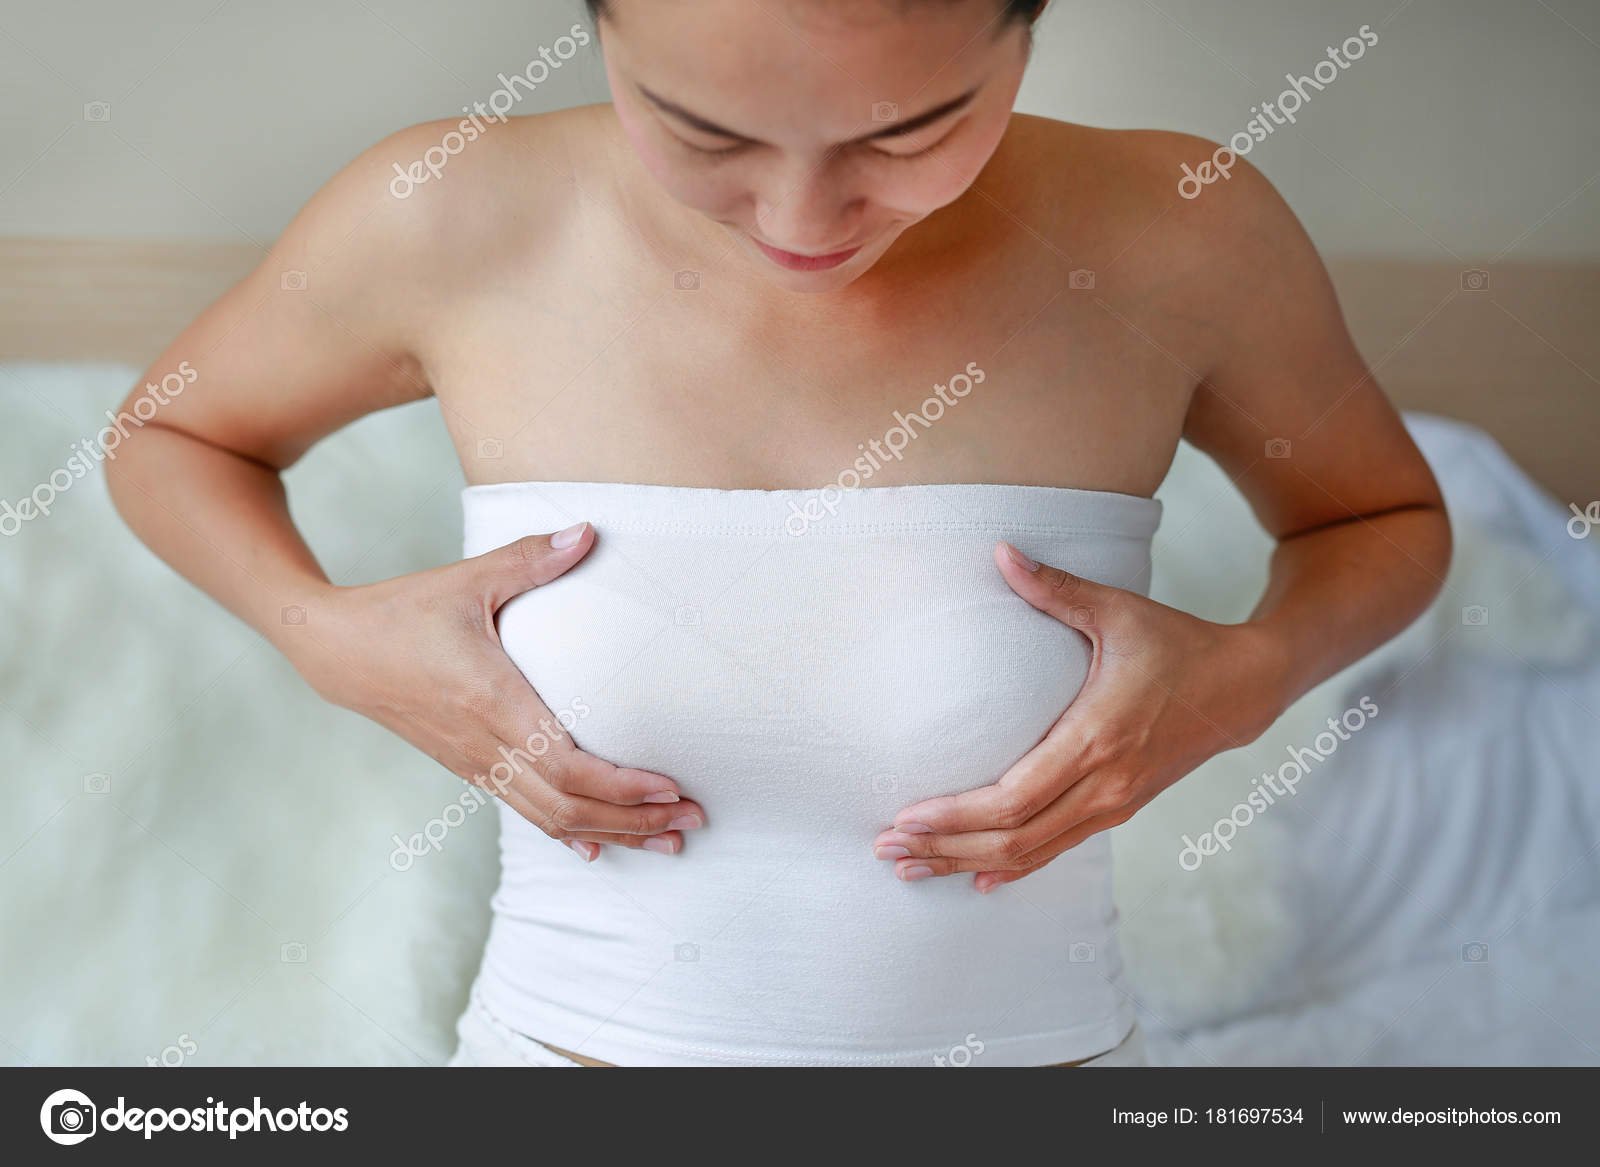 Nursing Mother Examines Her Nude Breasts Strong Women's Breasts